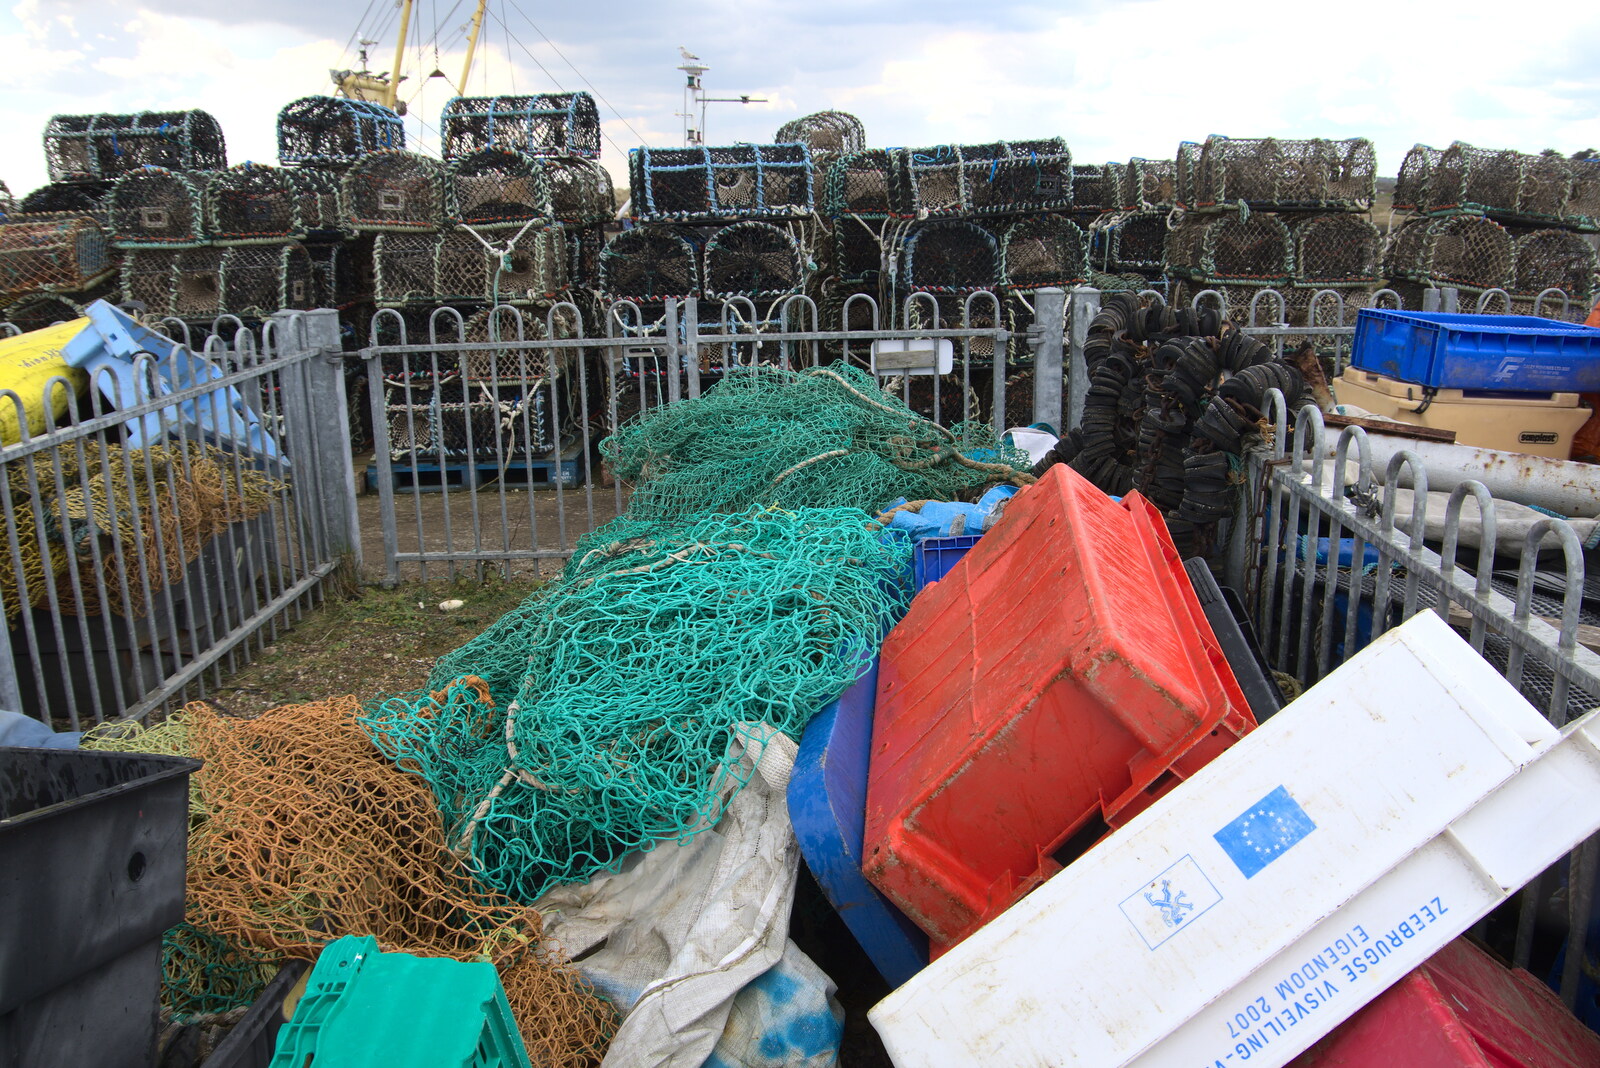 Piles of netting from A Chilly Trip to the Beach, Southwold Harbour, Suffolk - 2nd May 2021